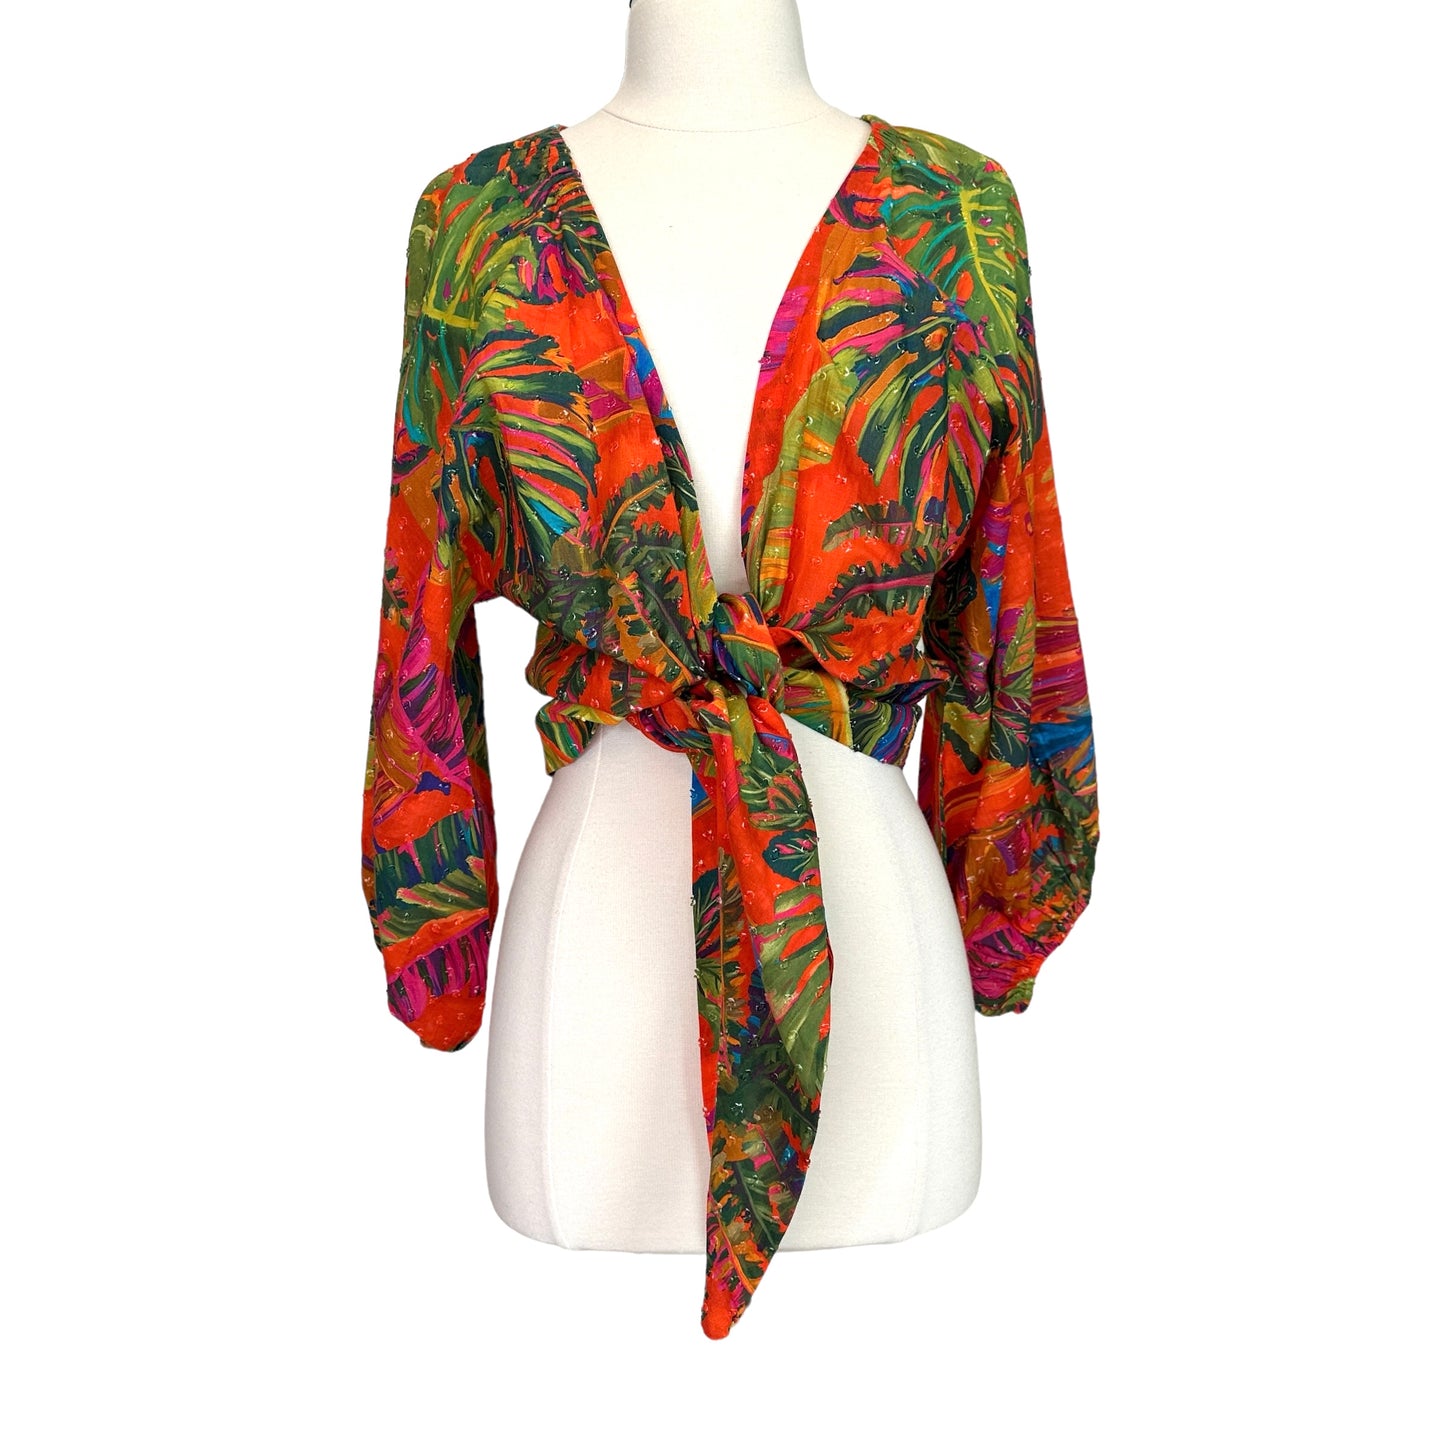 Colorful Knotted Top - M